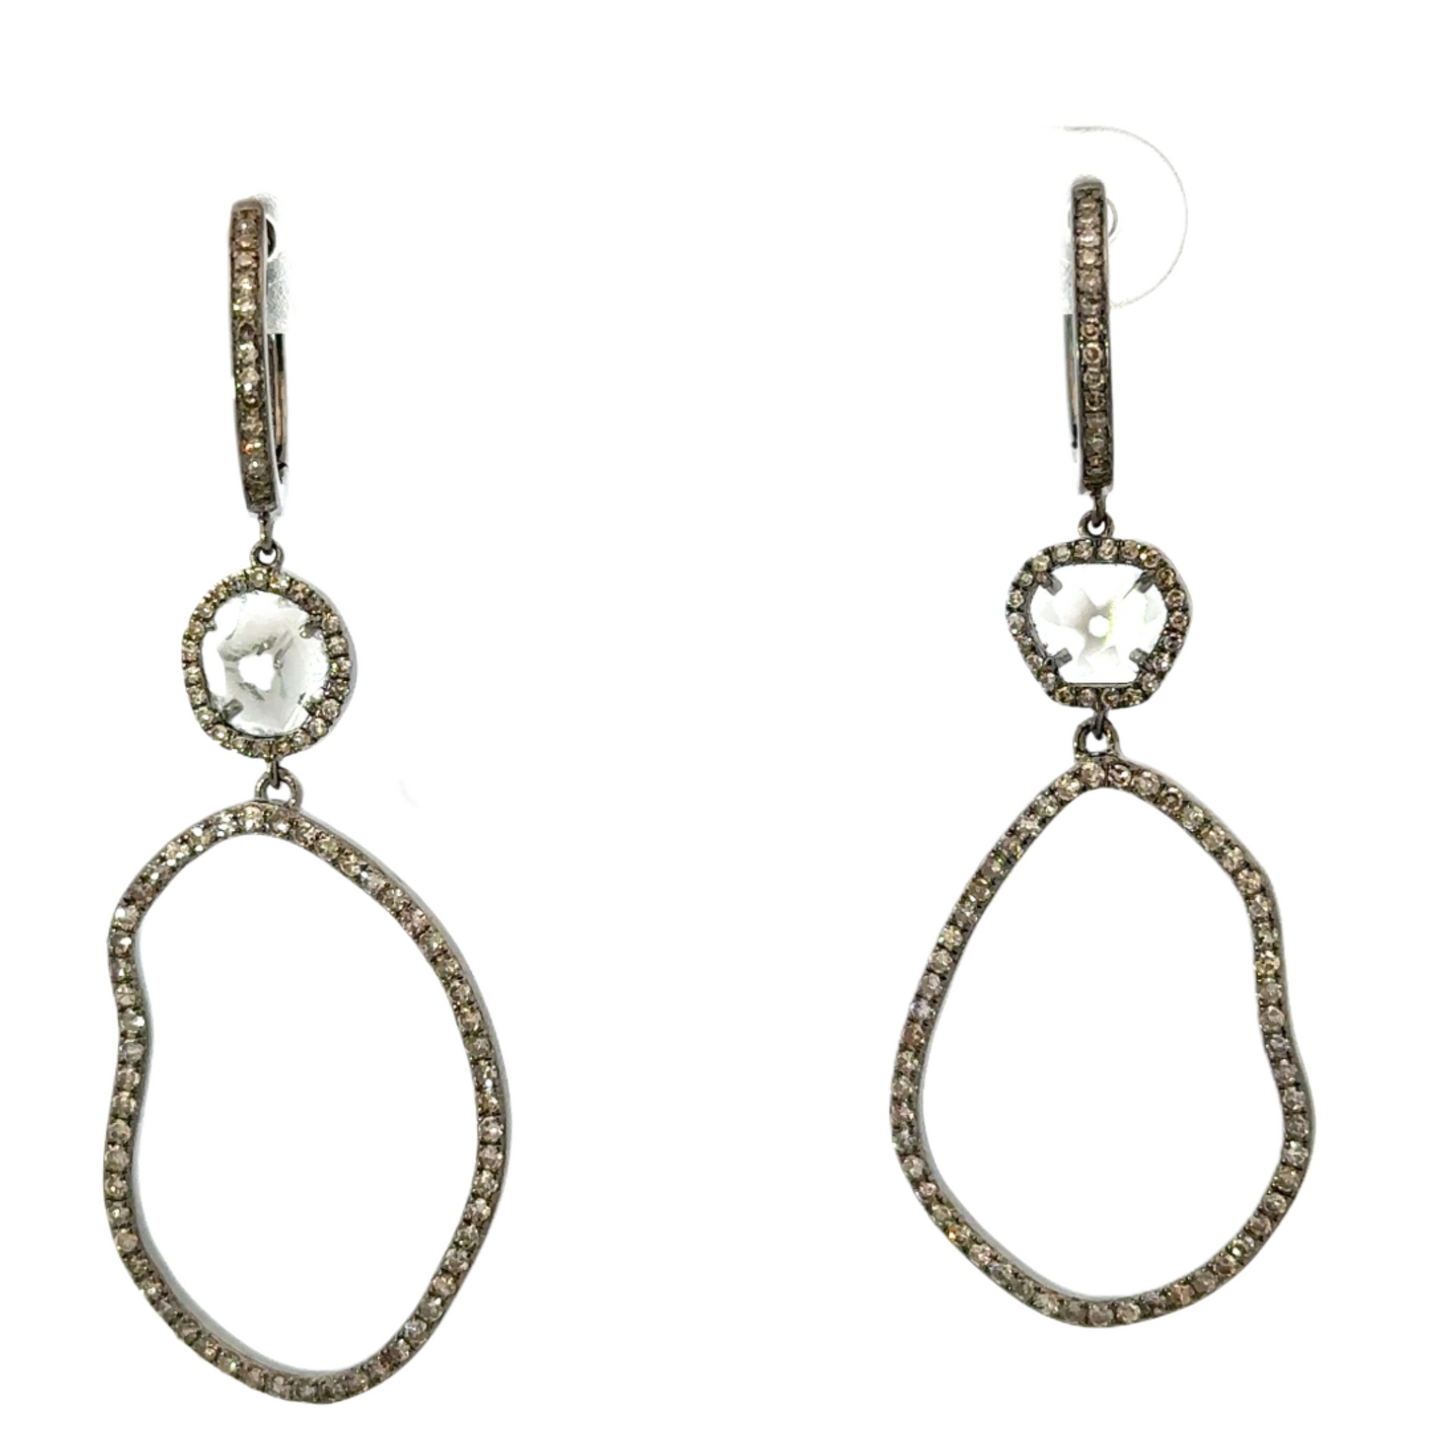 Organic Shaped Earring with Sliced Diamond Accent